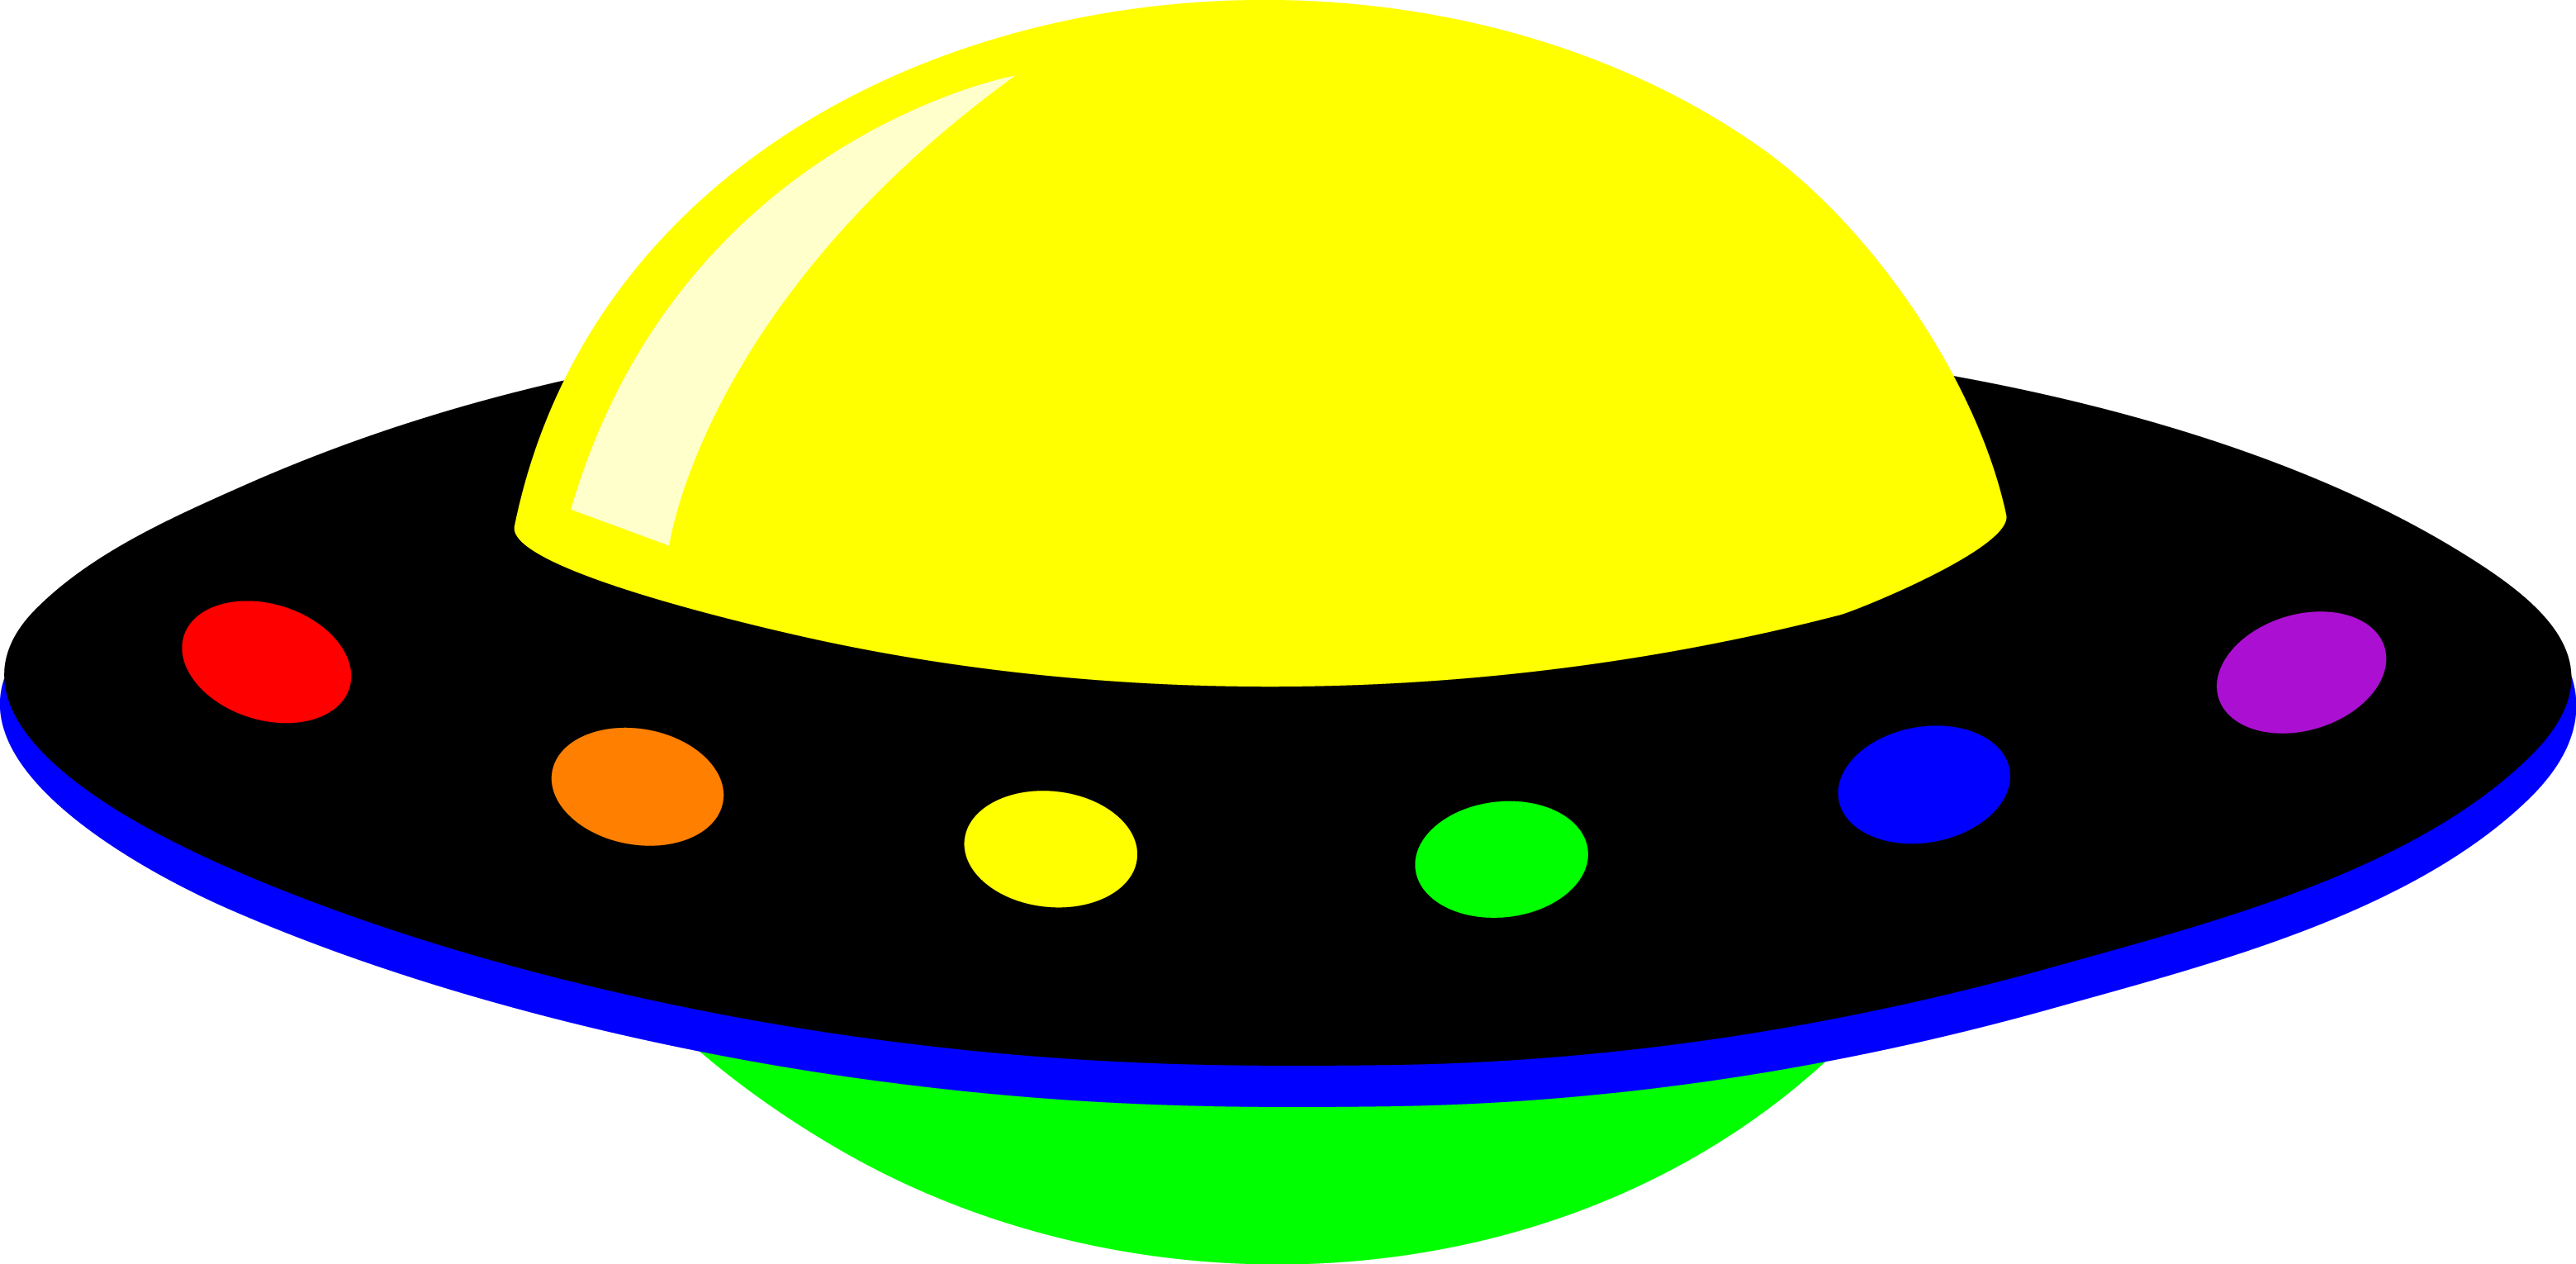 outer space clipart - photo #23